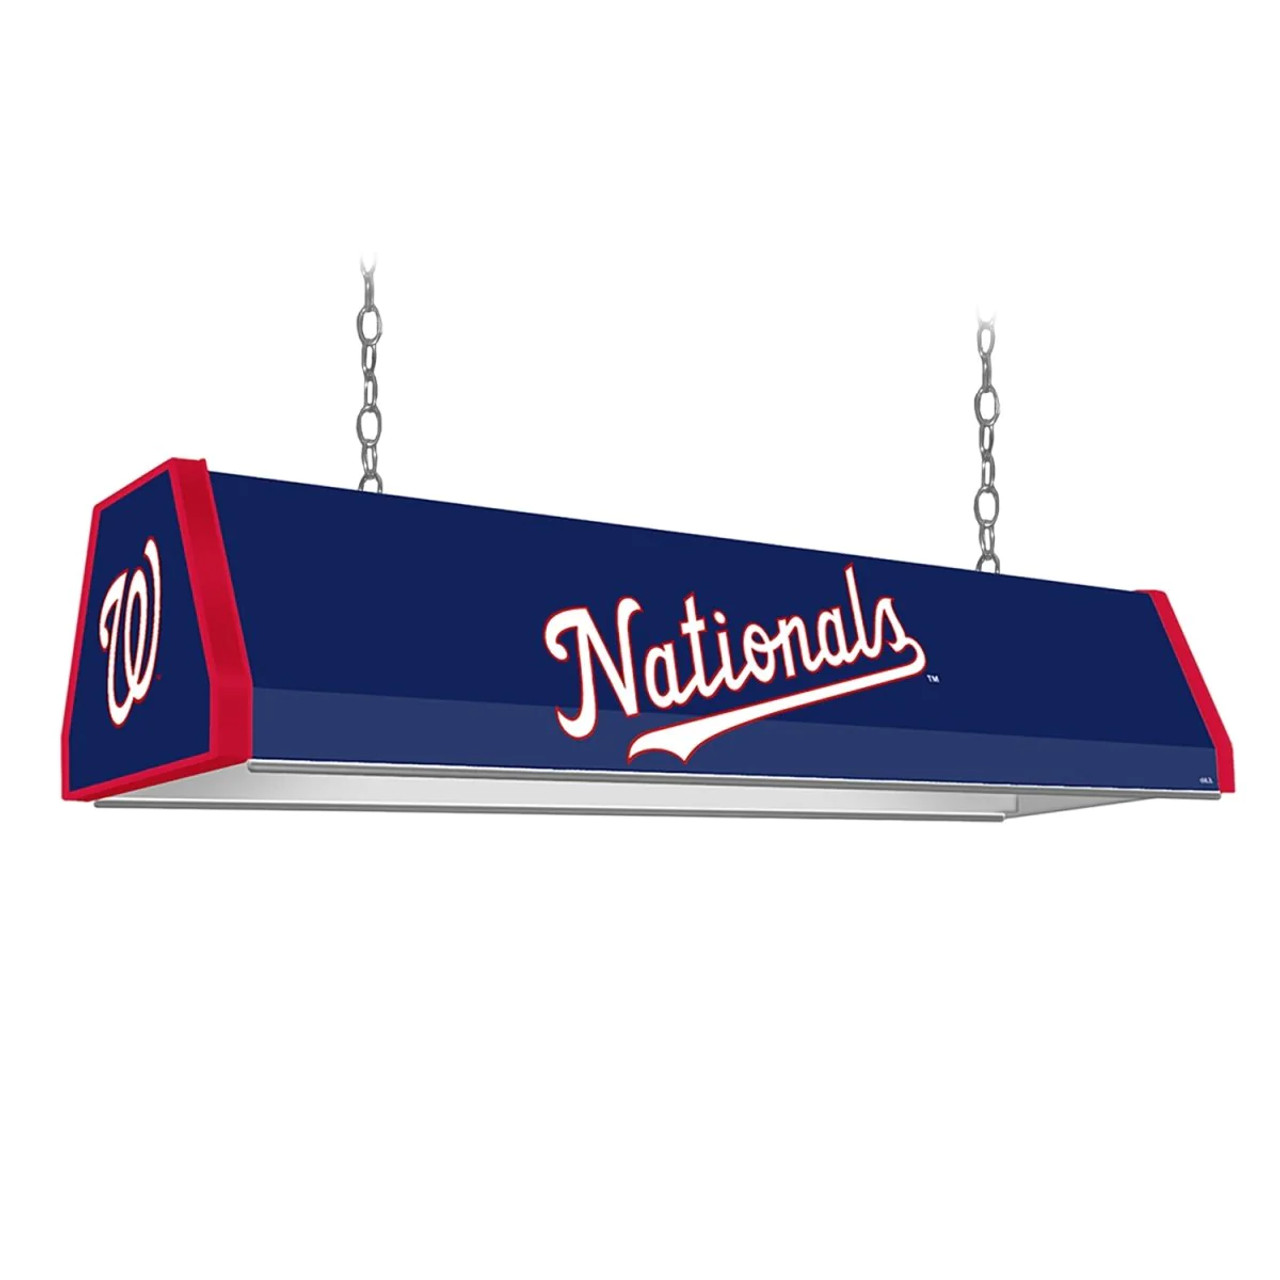 MBNATIONALS-310-01A, WAS, Washington, Nationals,  Standard, Billiard, Pool, Table, Light, Lamp, "A" Version, MLB, The Fan-Brand, 704384966739